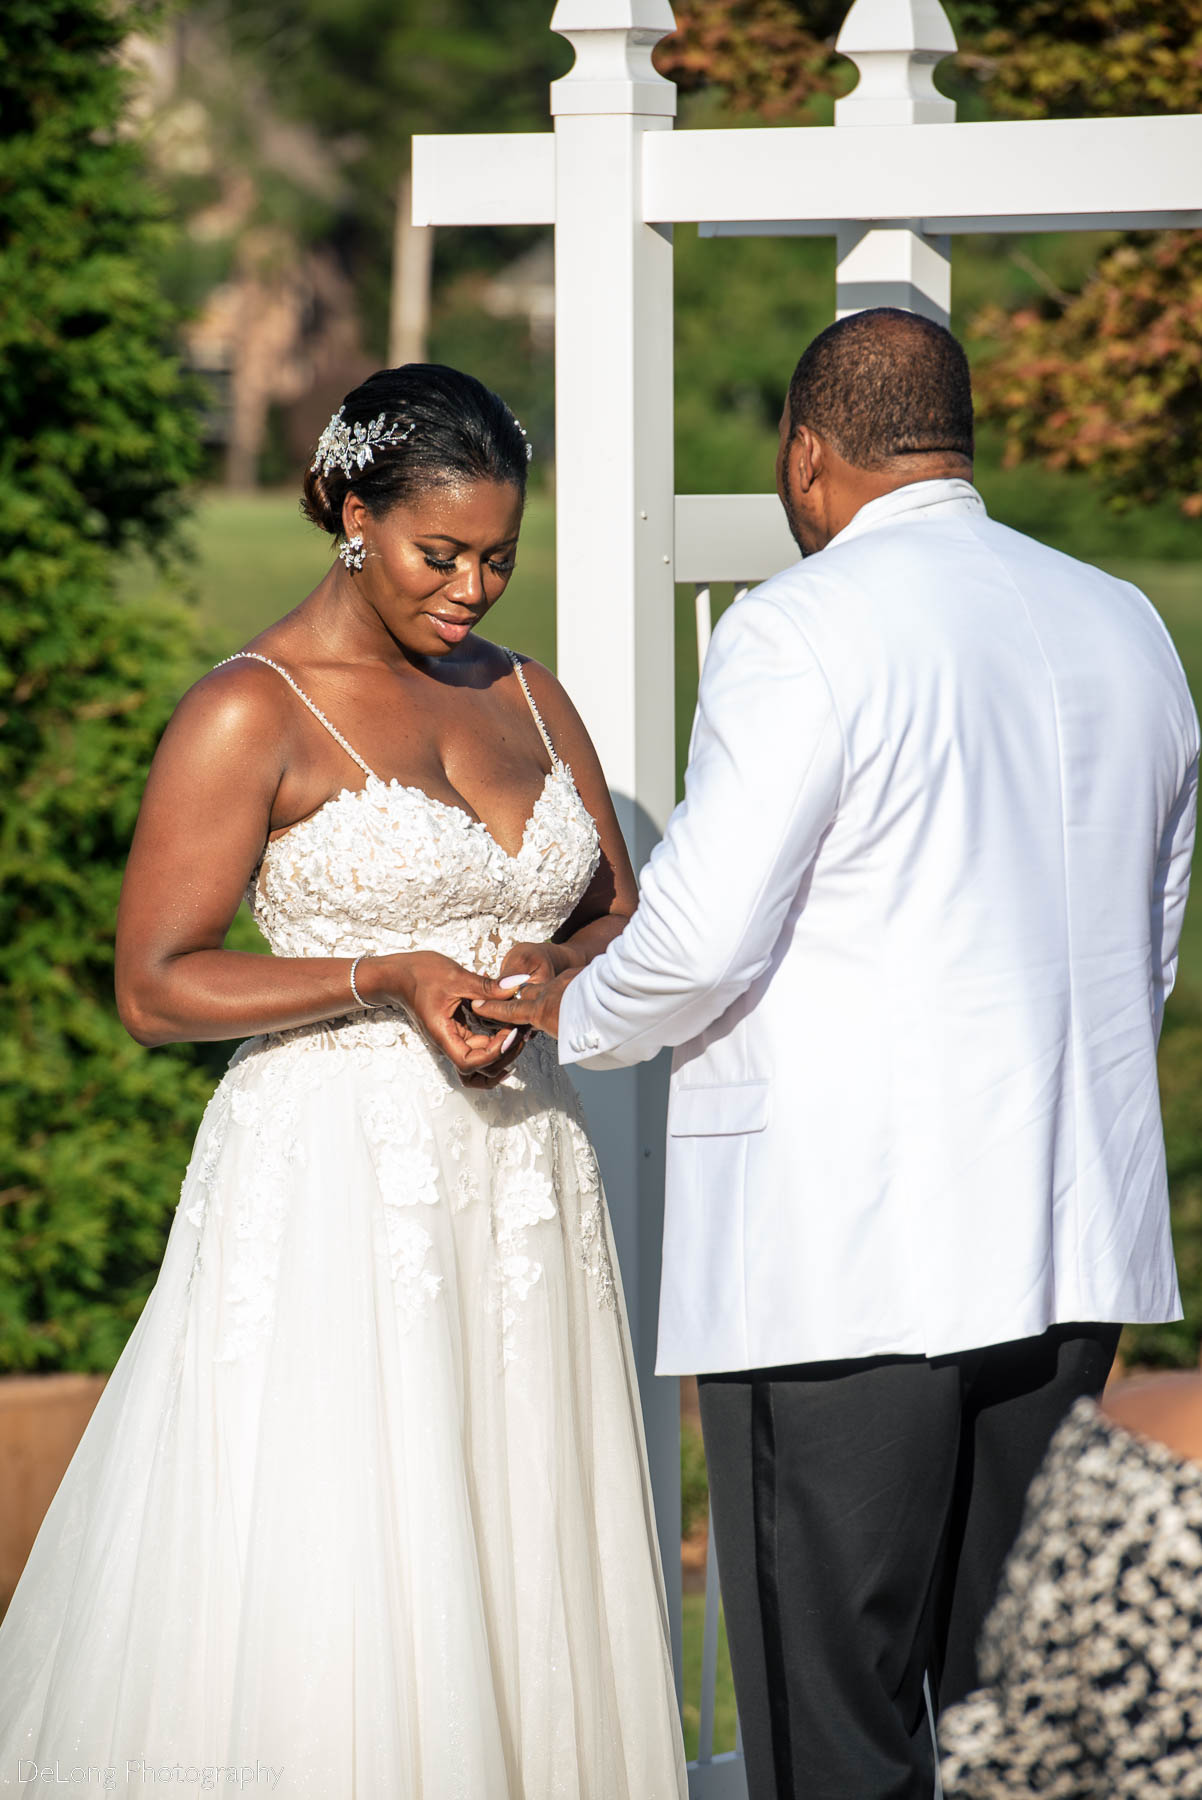 The bride placing the groom's wedding band on his finger during the wedding ceremony at at Providence Country Club by Charlotte wedding photographers DeLong Photography